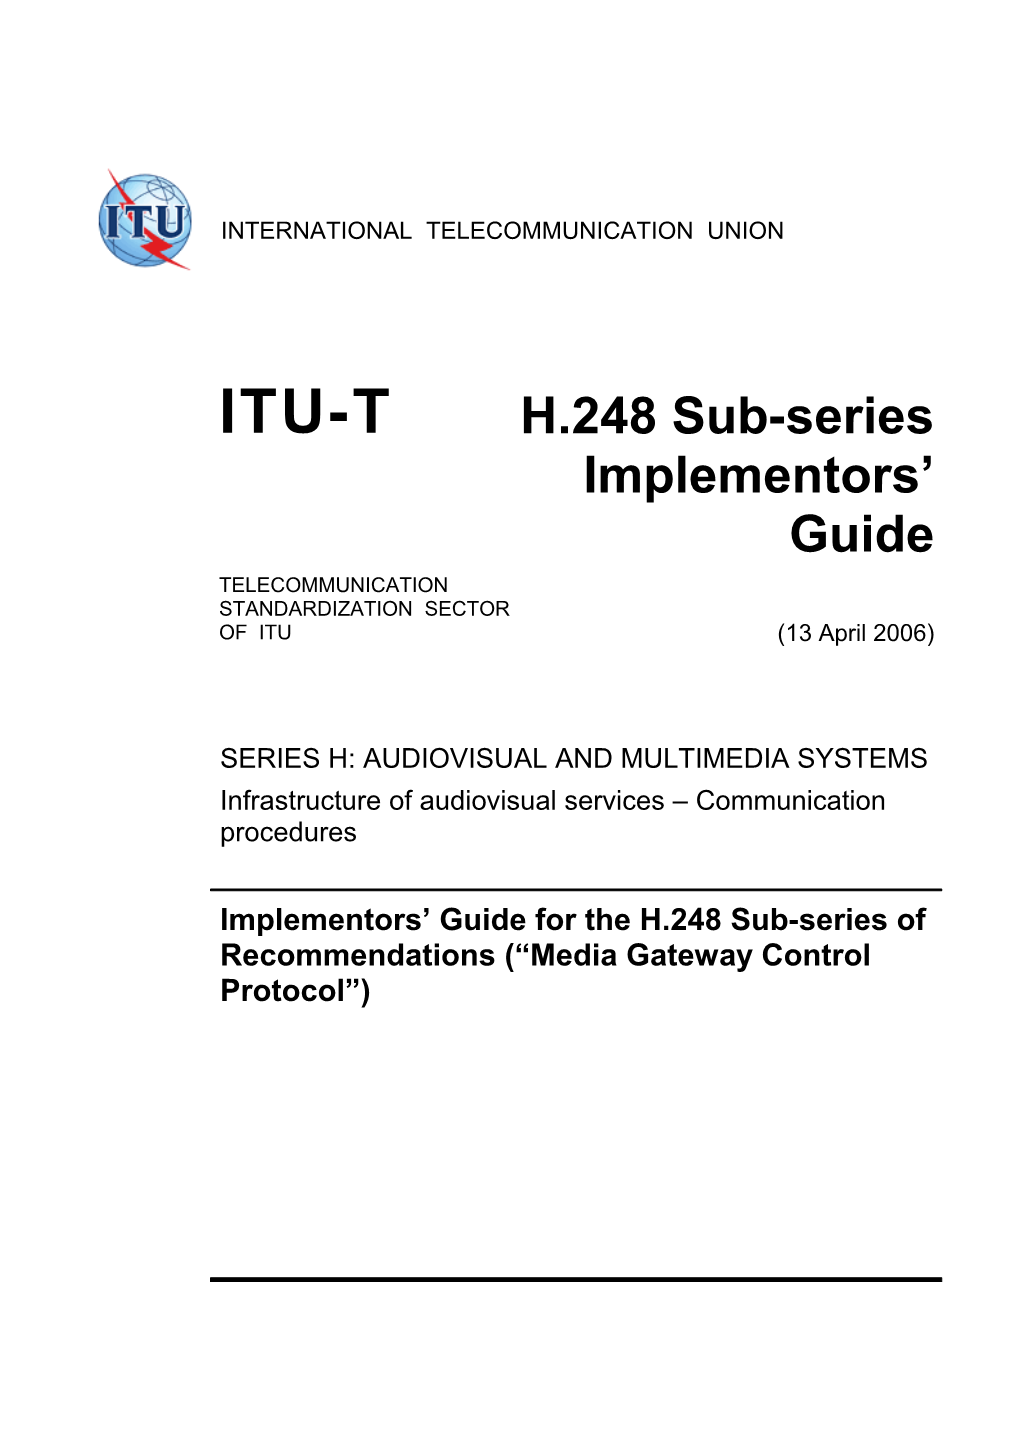 TEMPORARY DOCUMENT: Draft Revised H.248 Sub-Series Implementors Guide (For Approval)